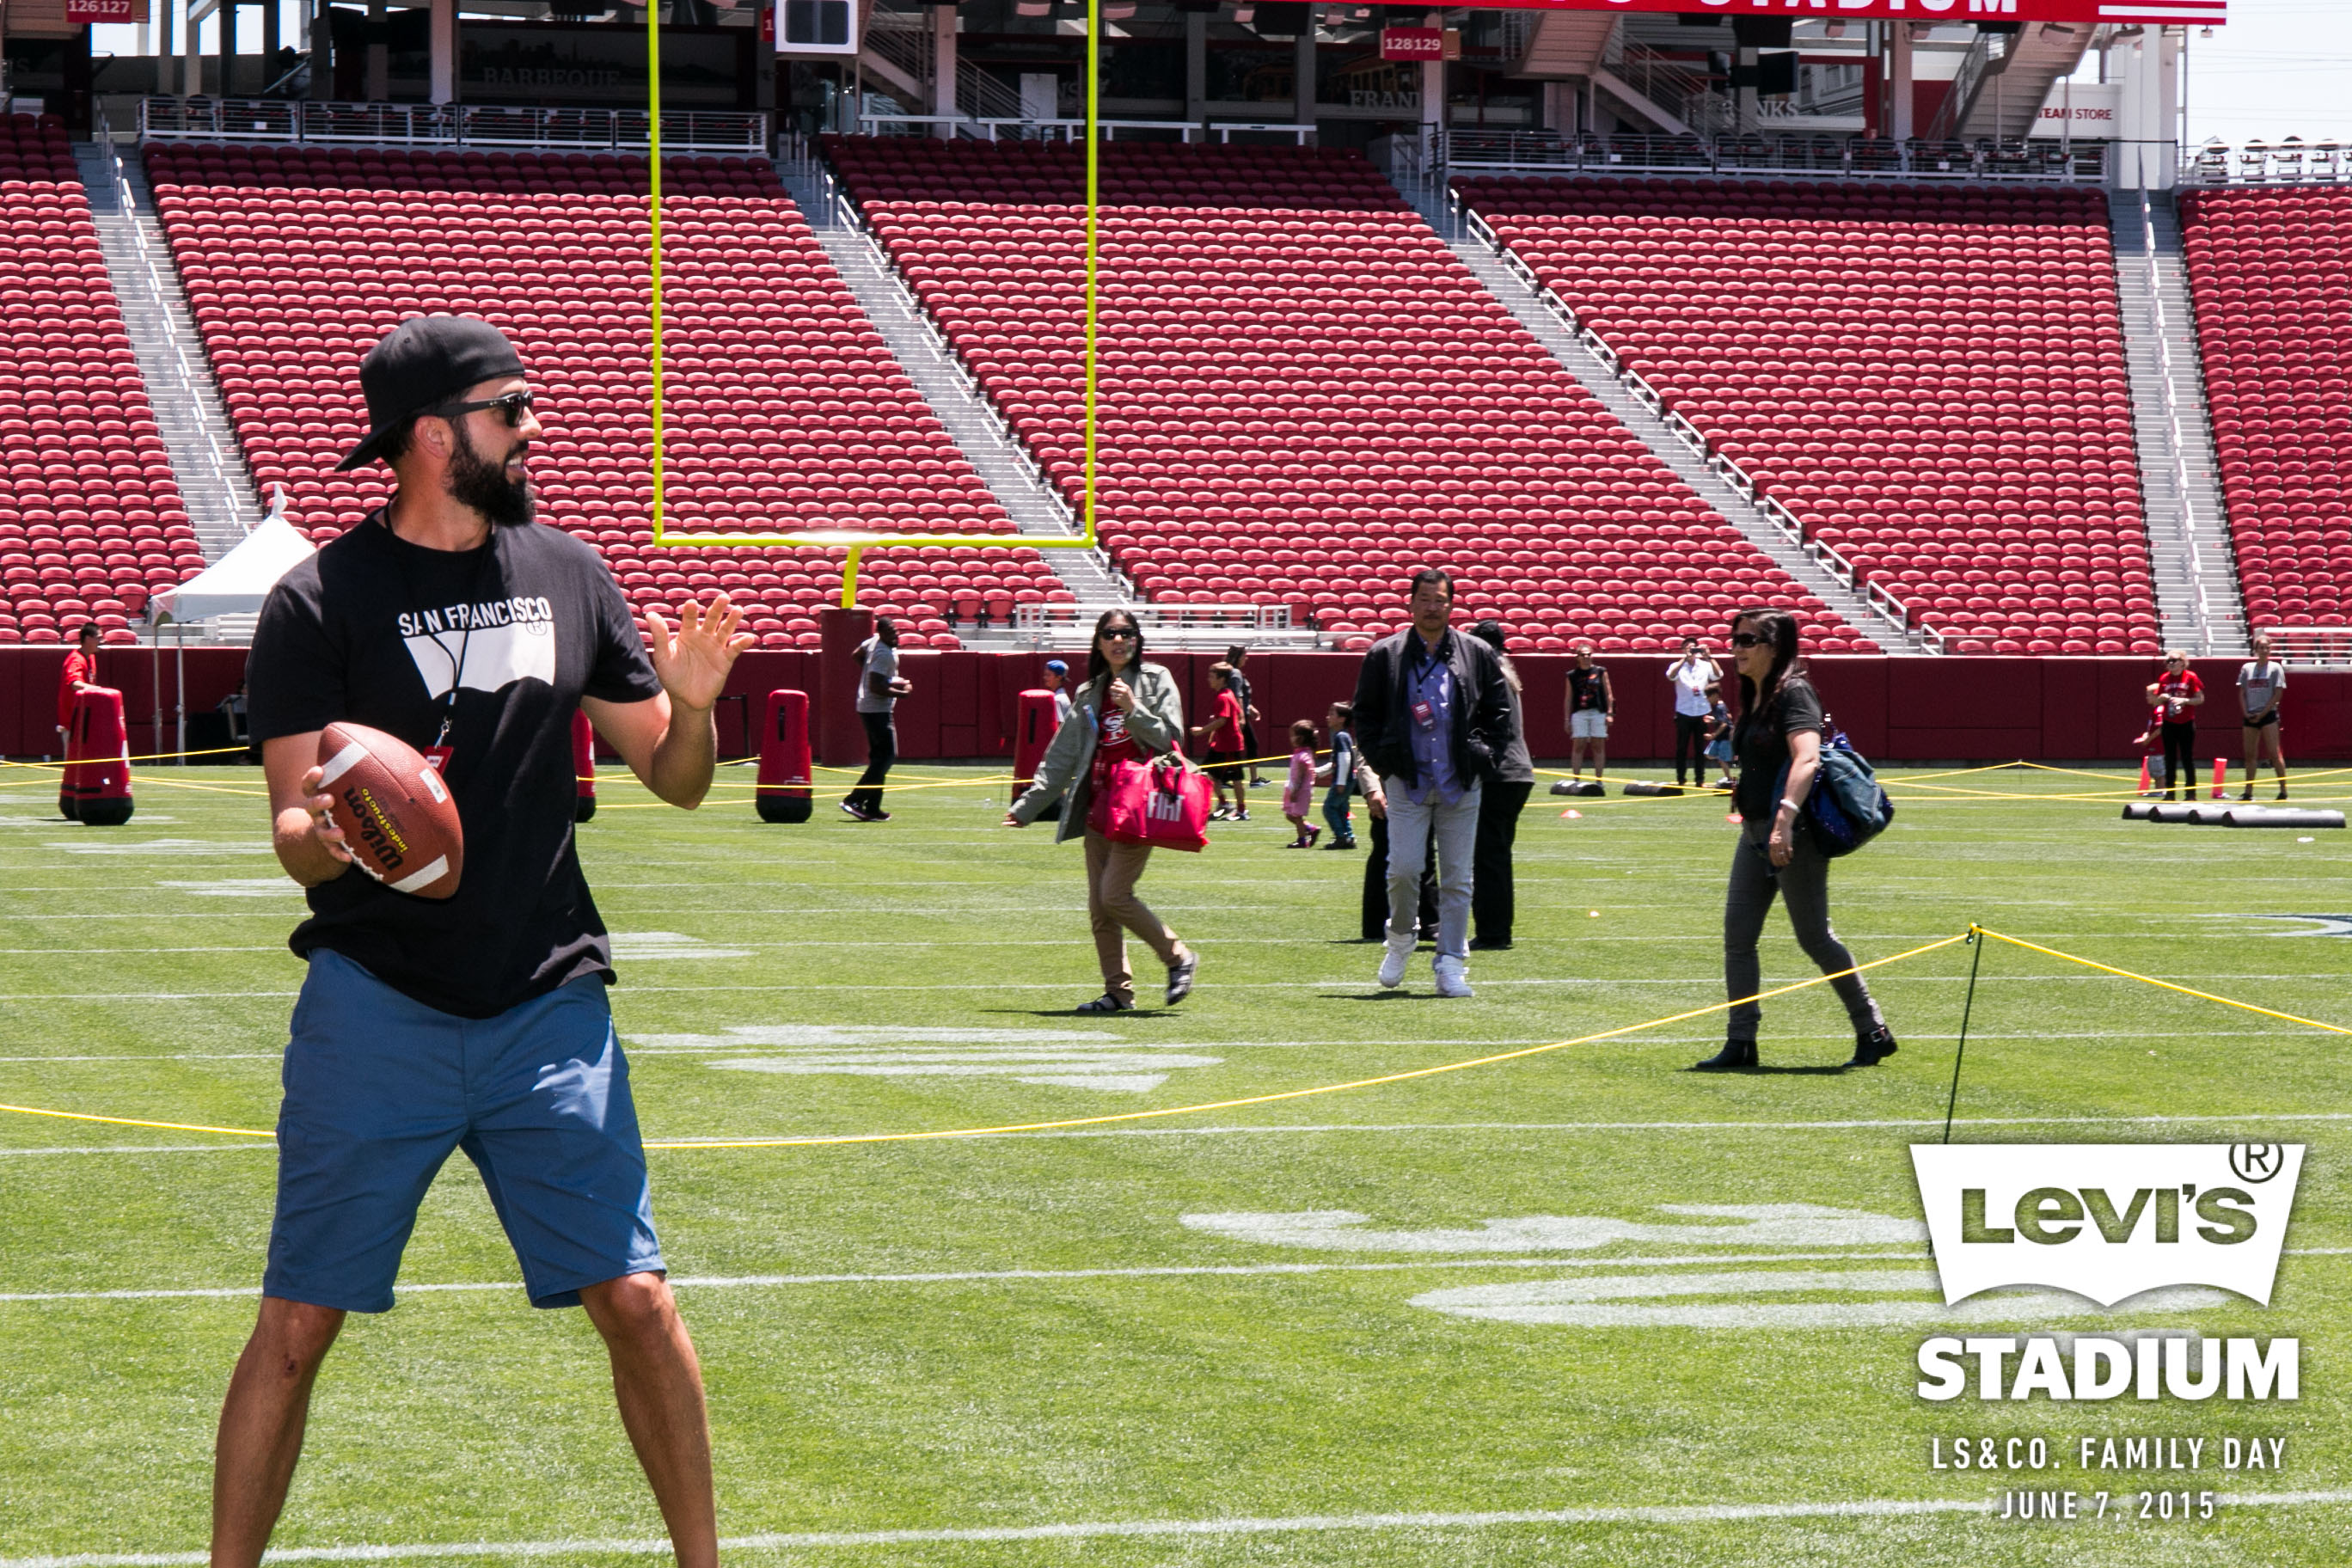 LS&Co. Employees Take the Field at Levi's Stadium : Levi Strauss & Co